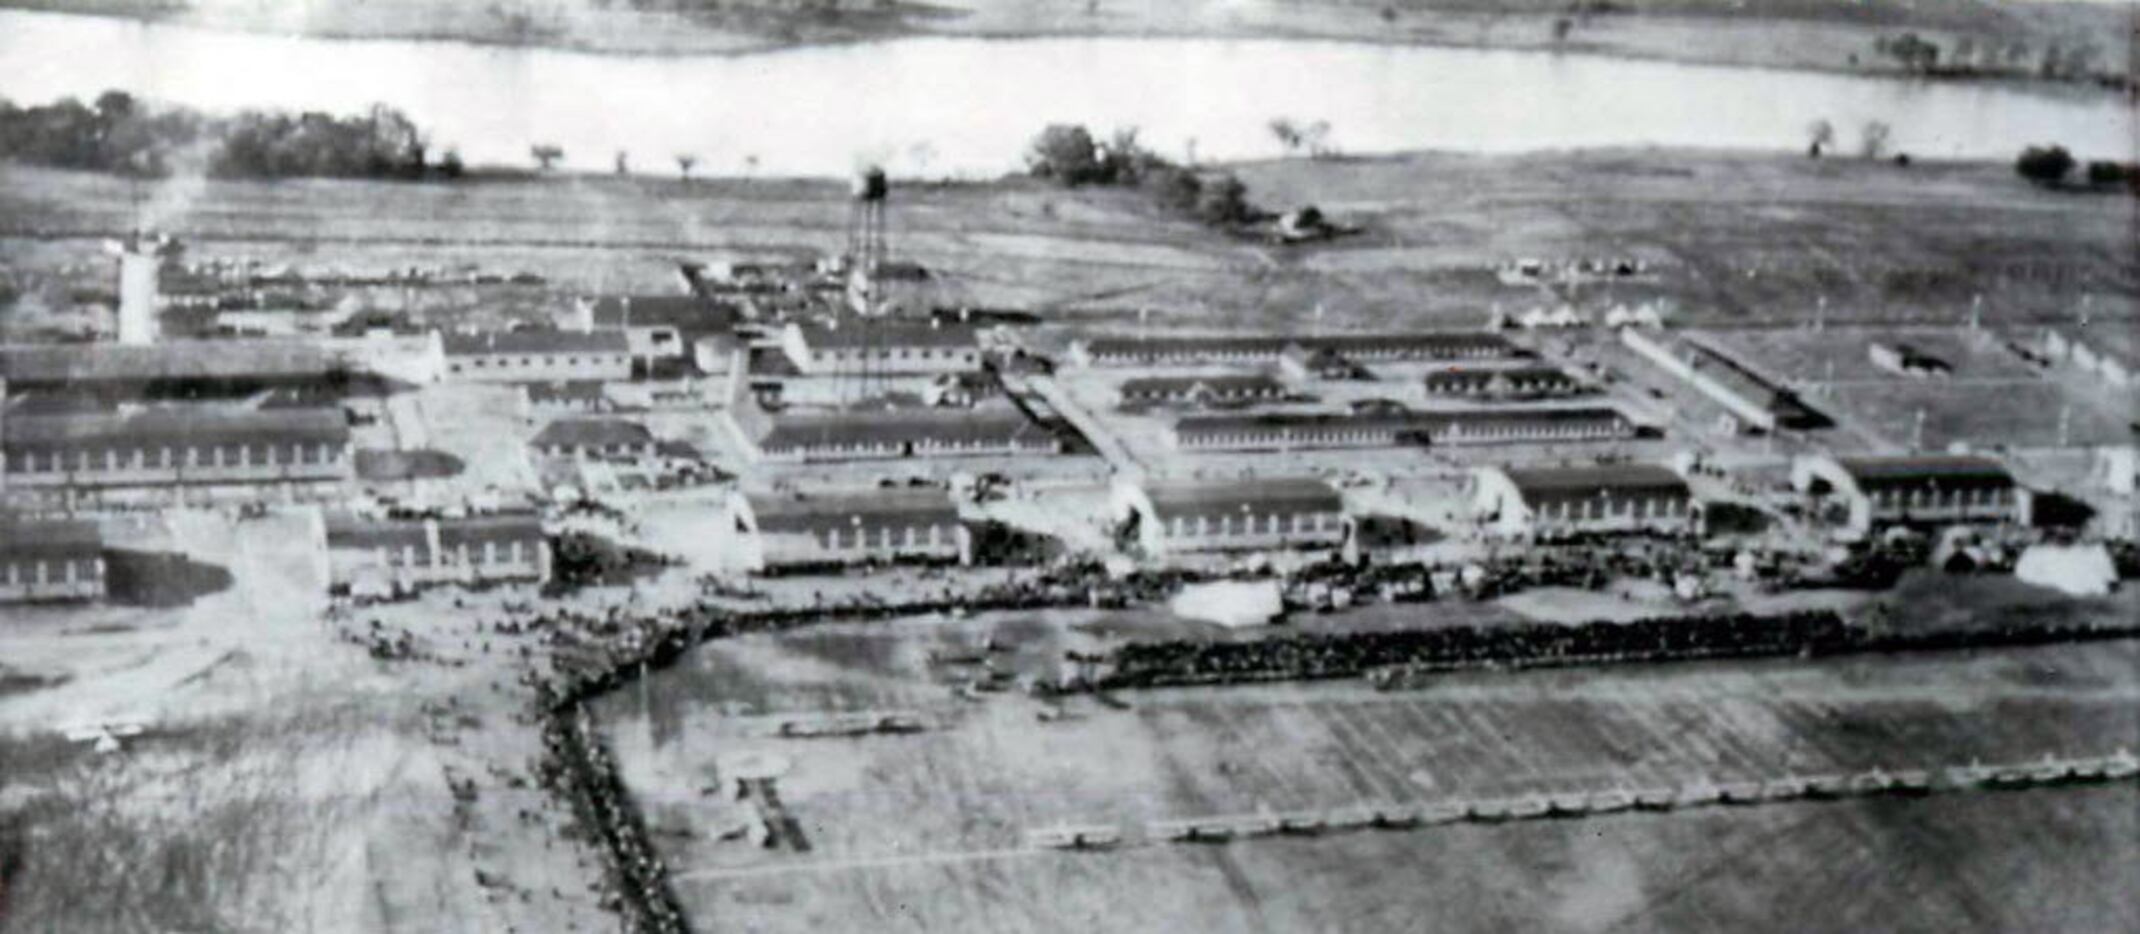 Dallas Love Field in 1918, when it was an Army Air Corps base for bi-planes. 